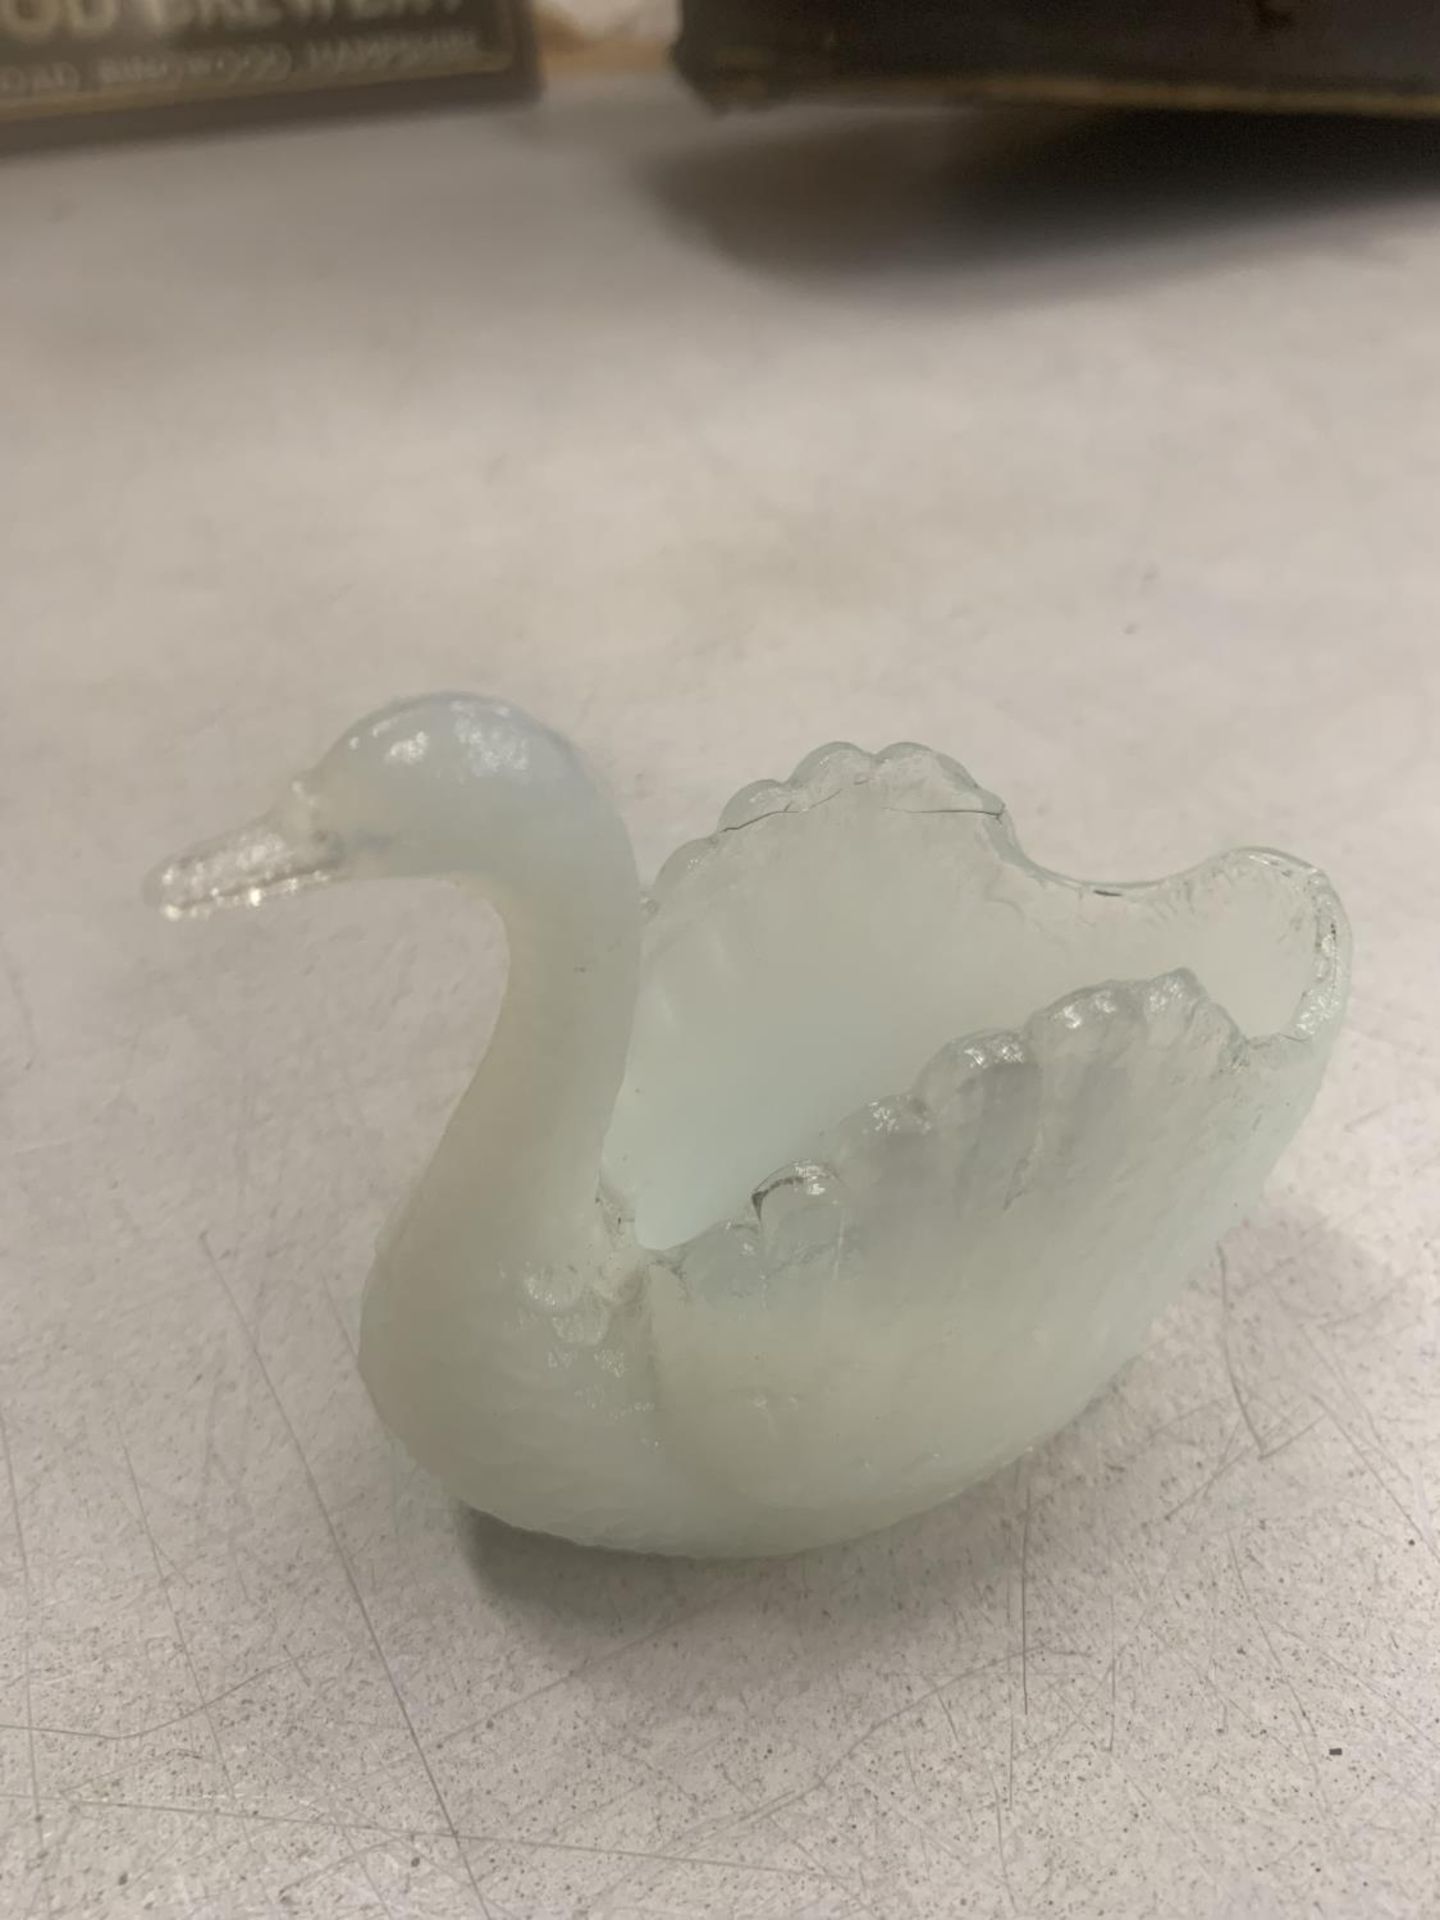 A FRENCH BLUE AND OPAQUE GLASS SWAN HEIGHT 7CM, WIDTH 8CM - Image 3 of 3